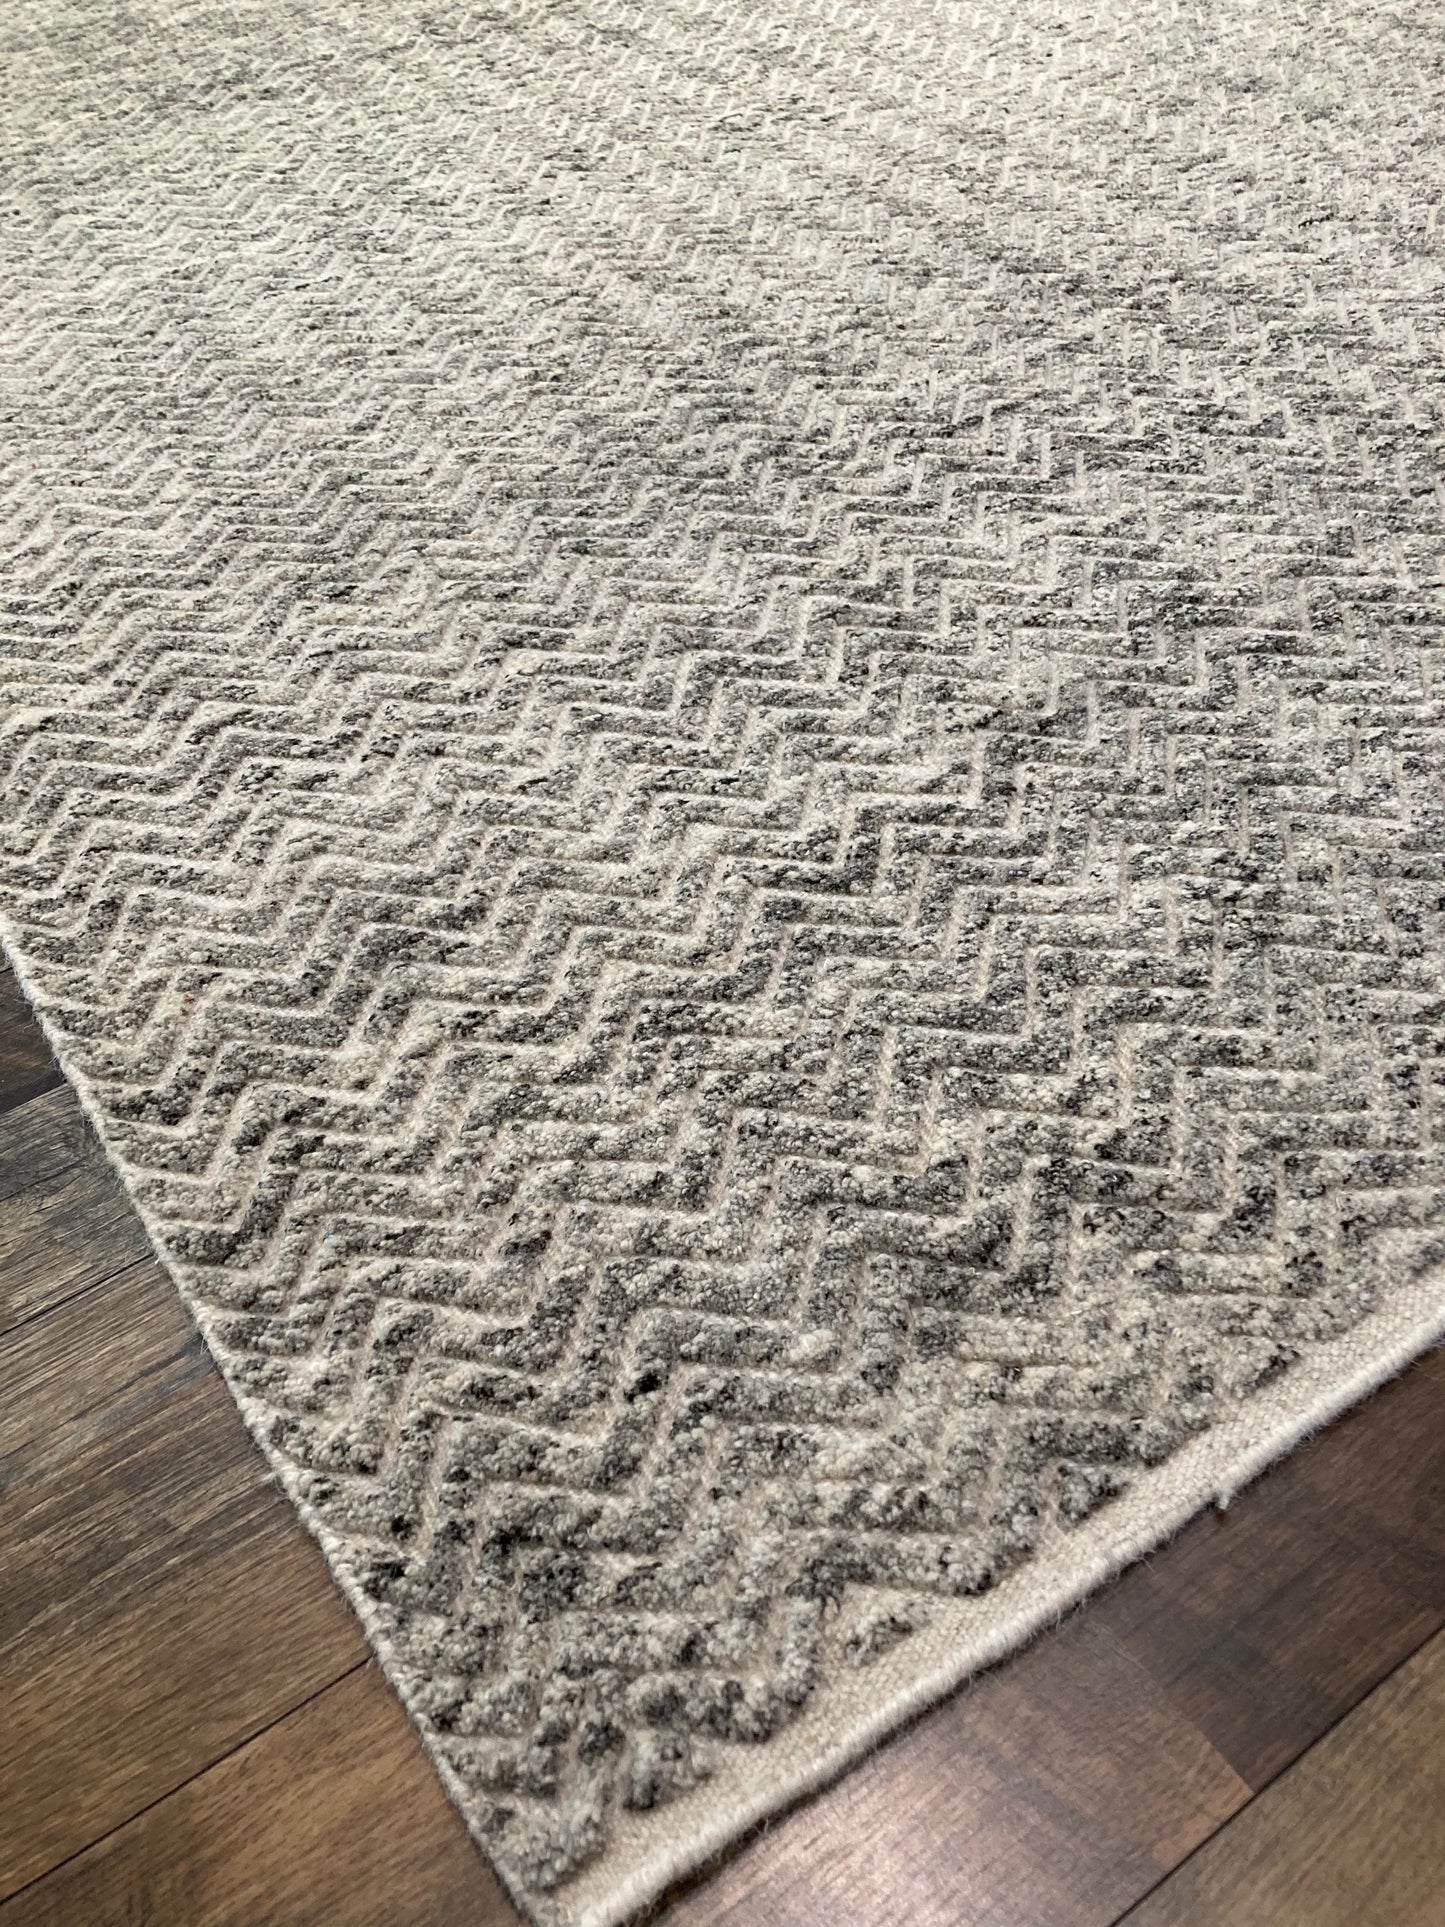 refined carpet rugs high low area rug textured chevron herringbone pattern gray oatmeal area rug online contemporary transitional affordable area rug store online orange county california fountain valley ca 92708